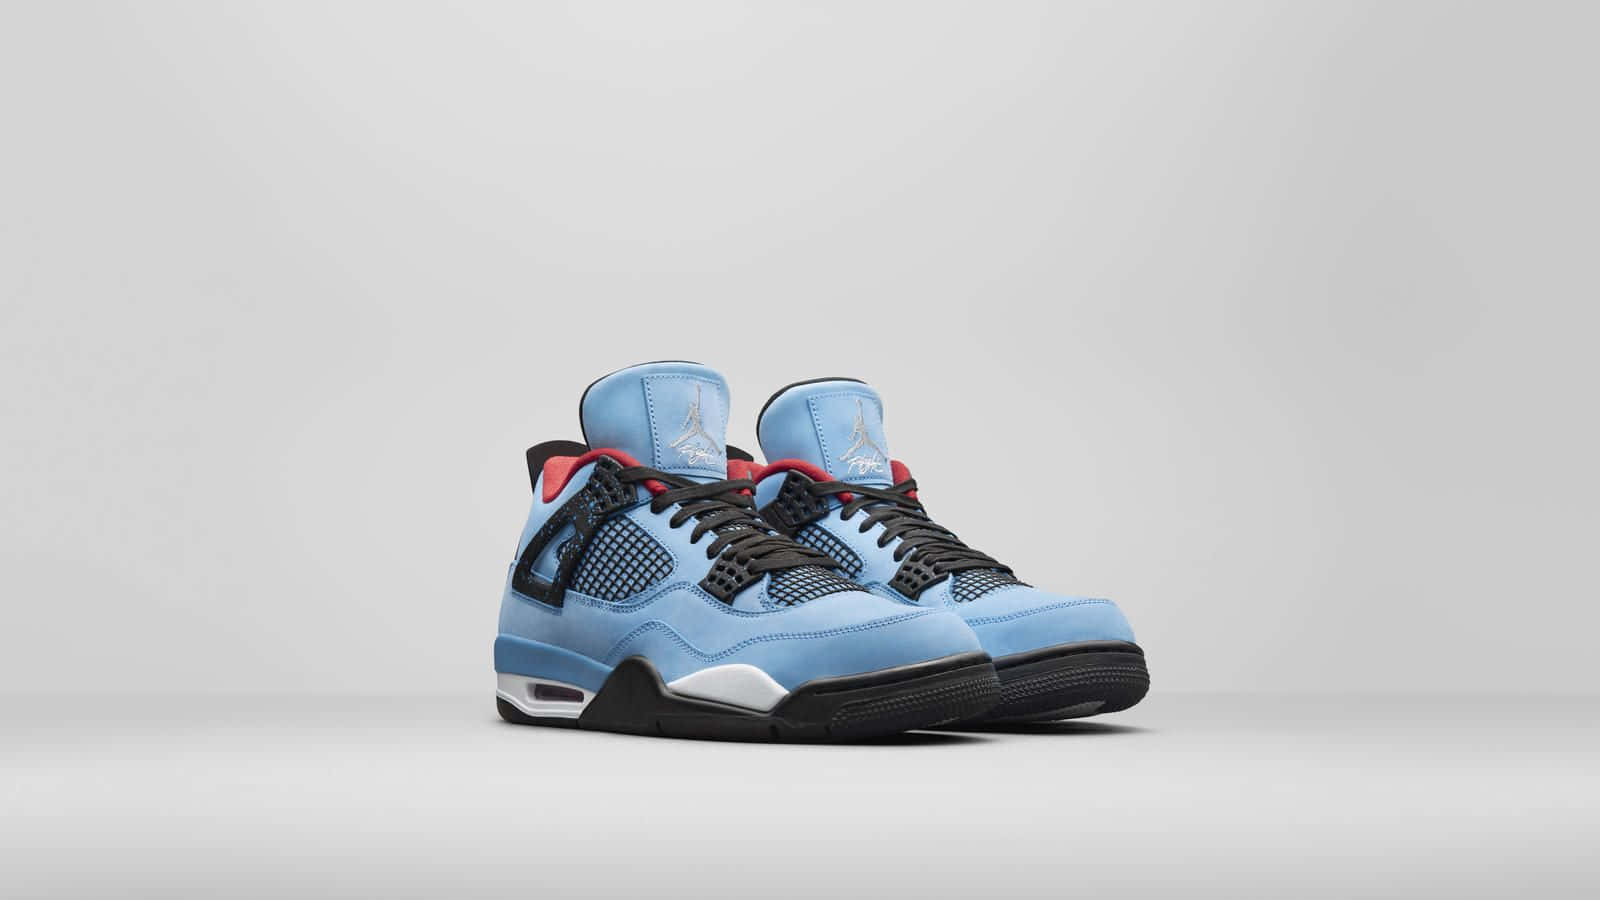 Fly High In Style With The Air Jordan 4 Wallpaper